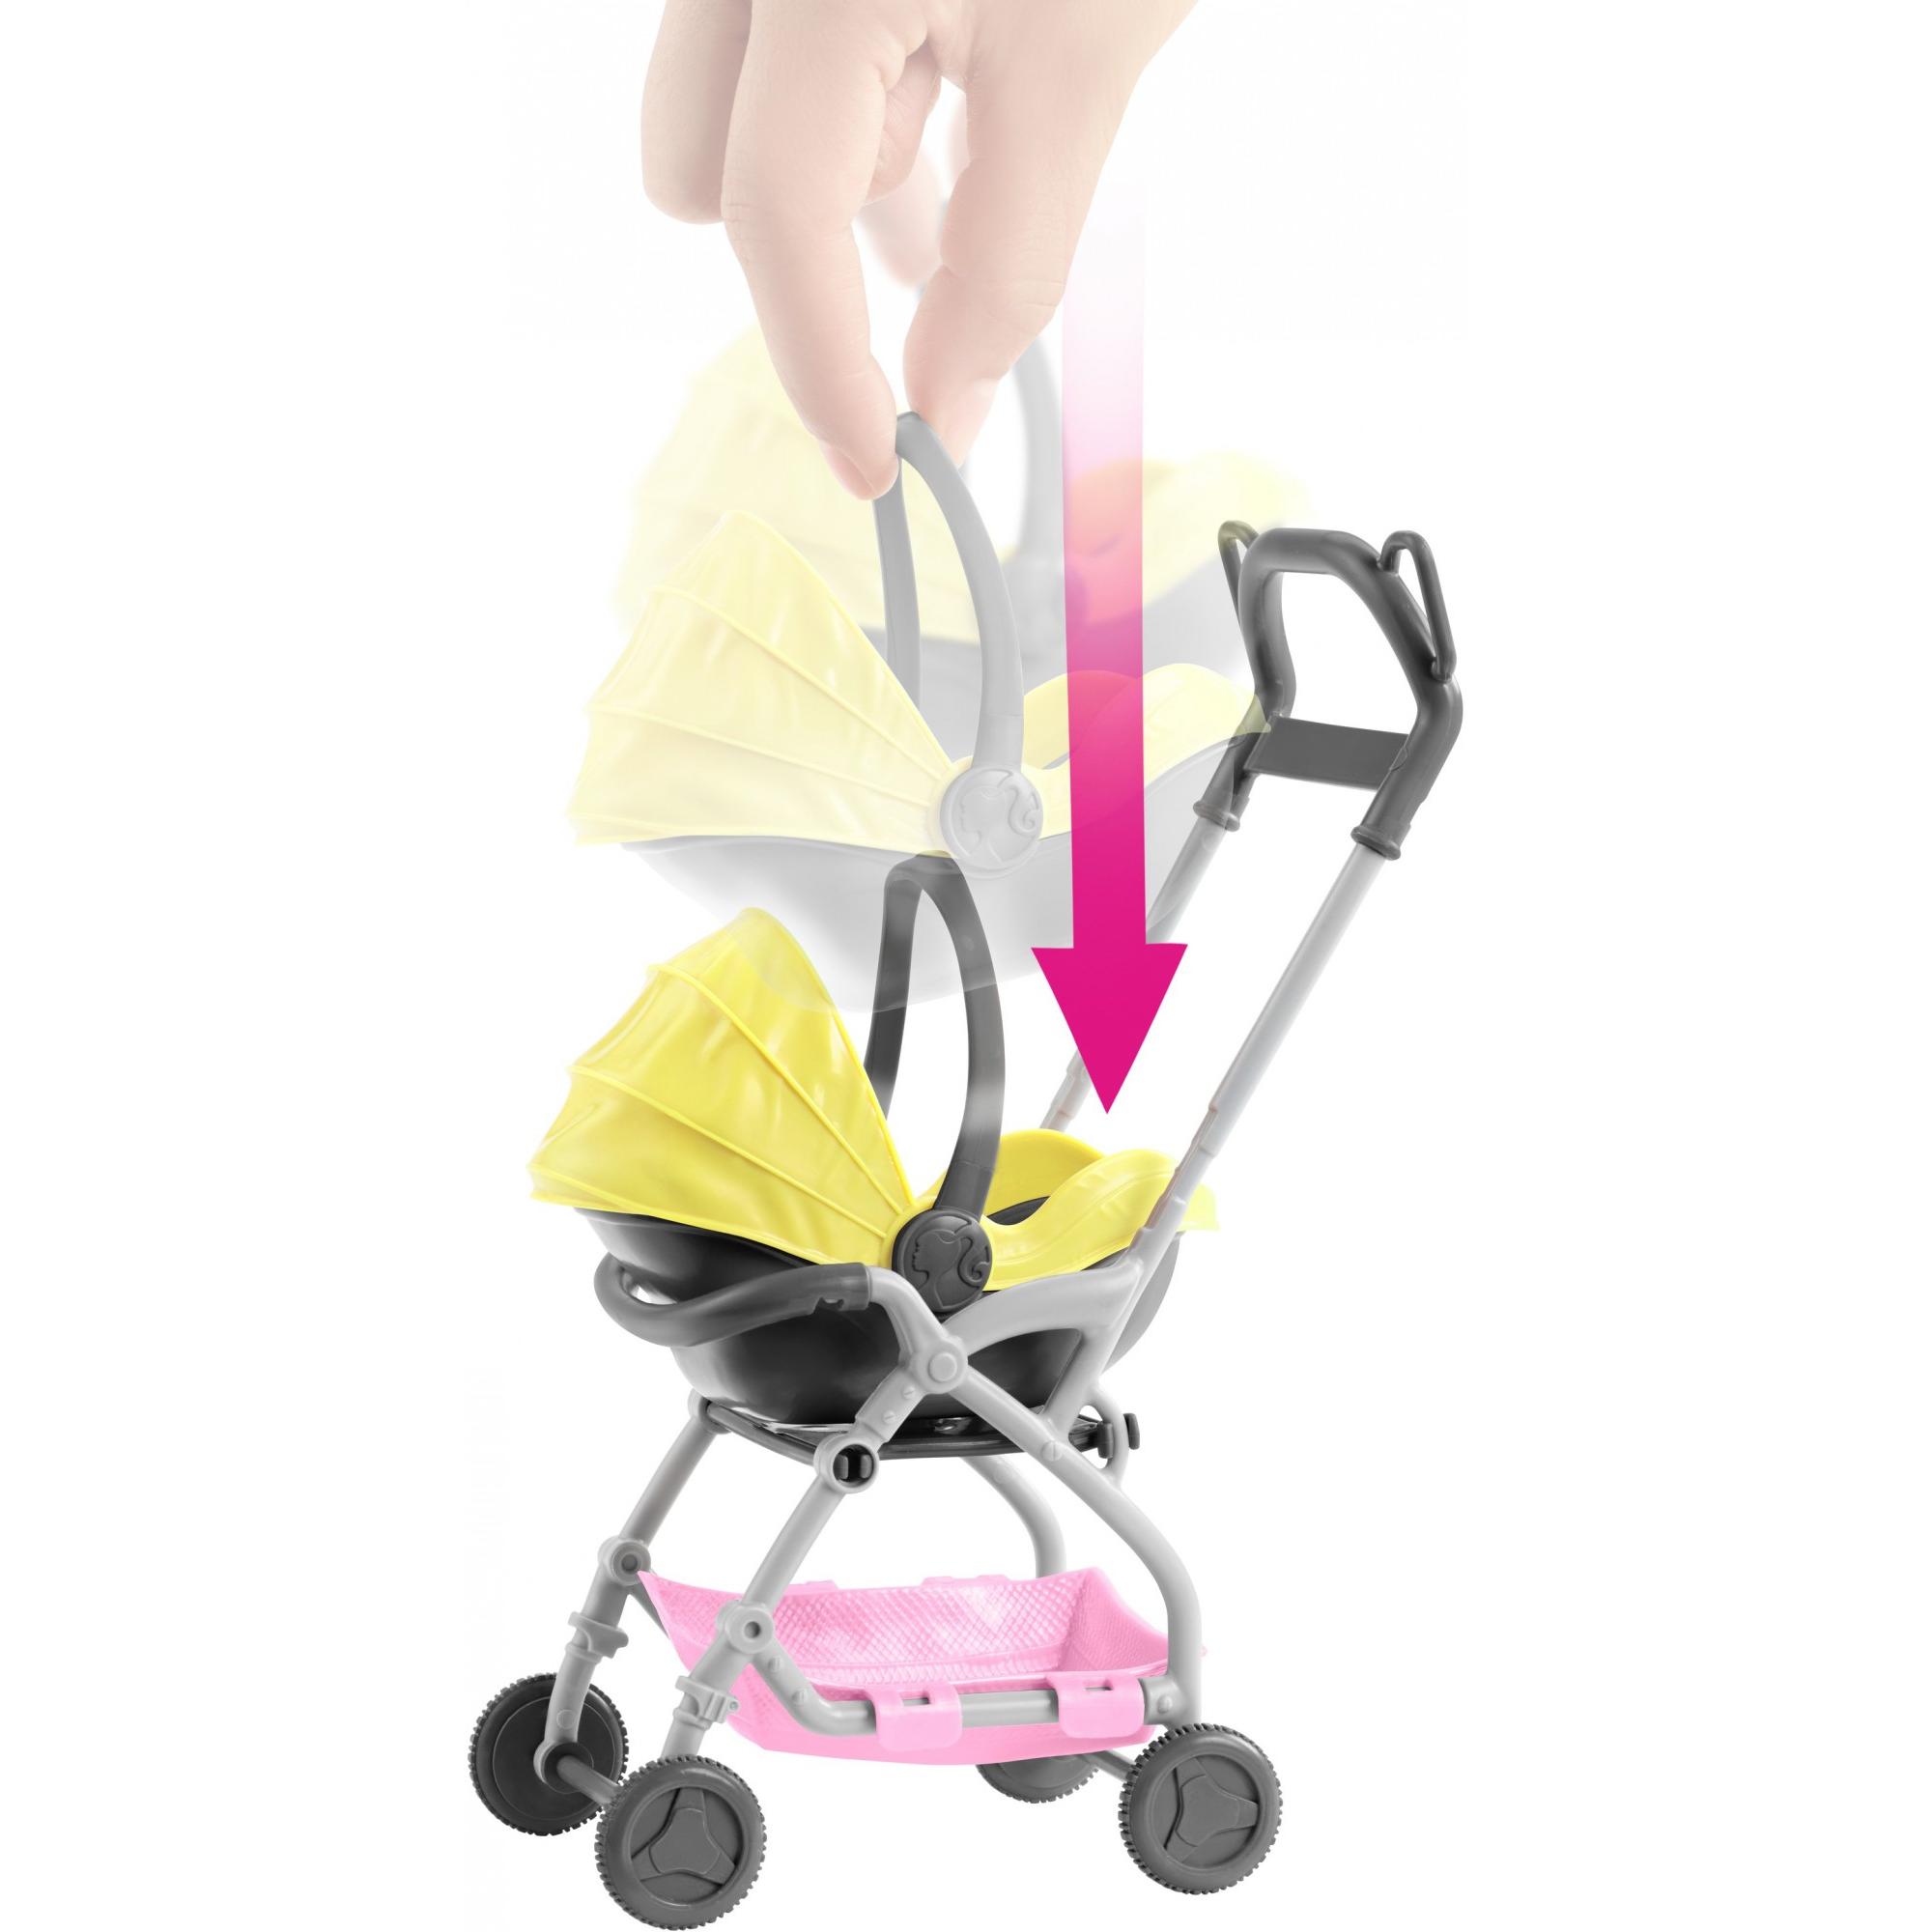 Barbie Skipper Babysitters Inc. Doll and Playset, Small Baby Doll with 2-in-1 Stroller - image 4 of 6